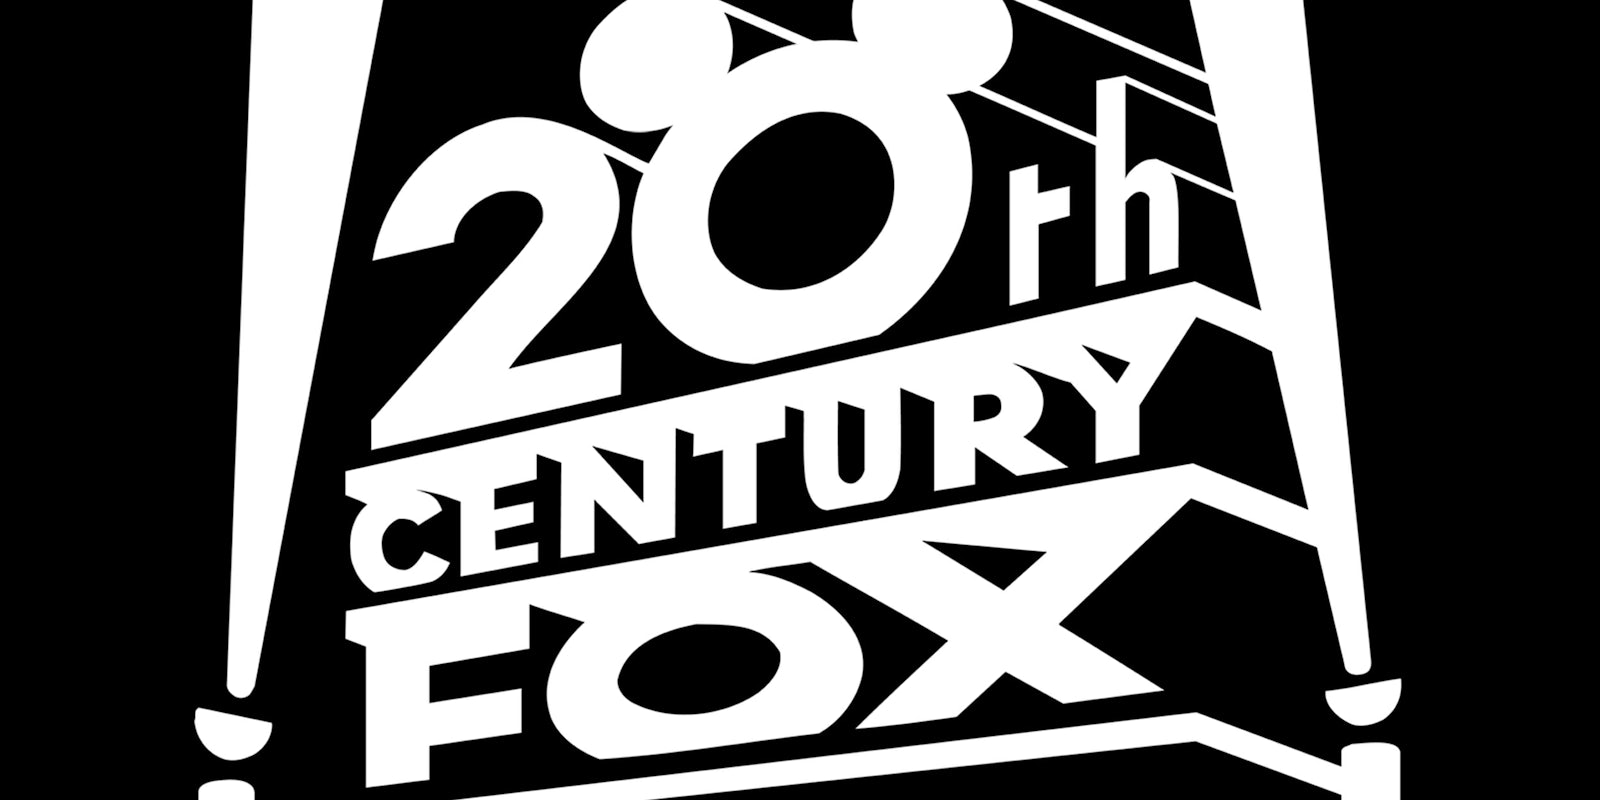 20th Century Fox with the 0 in '20th' wearing Mickey Mouse ears